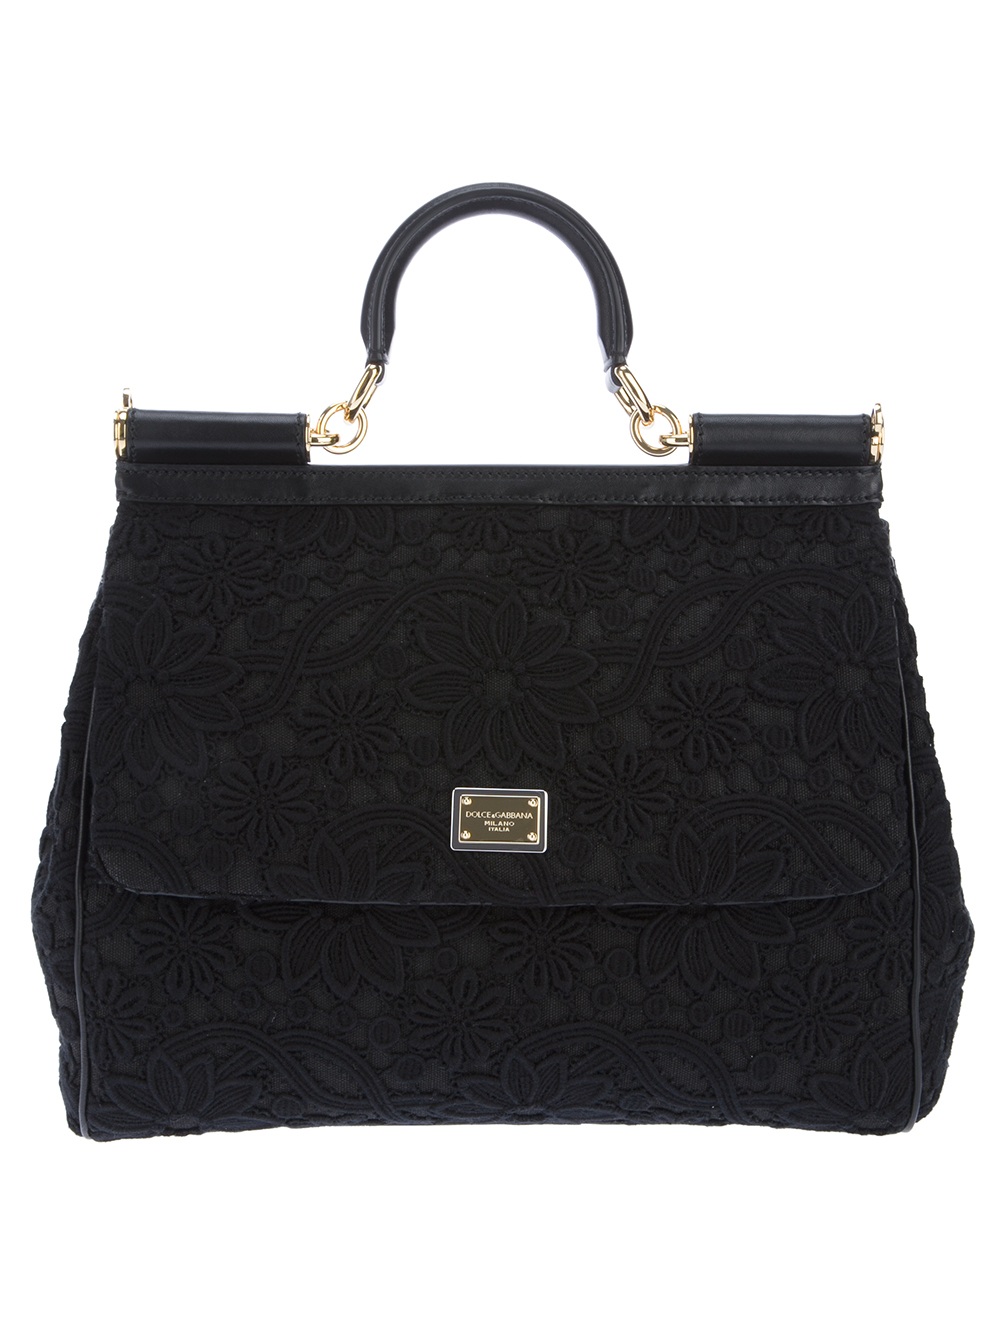 Lyst - Dolce & Gabbana Floral Lace Bag in Black